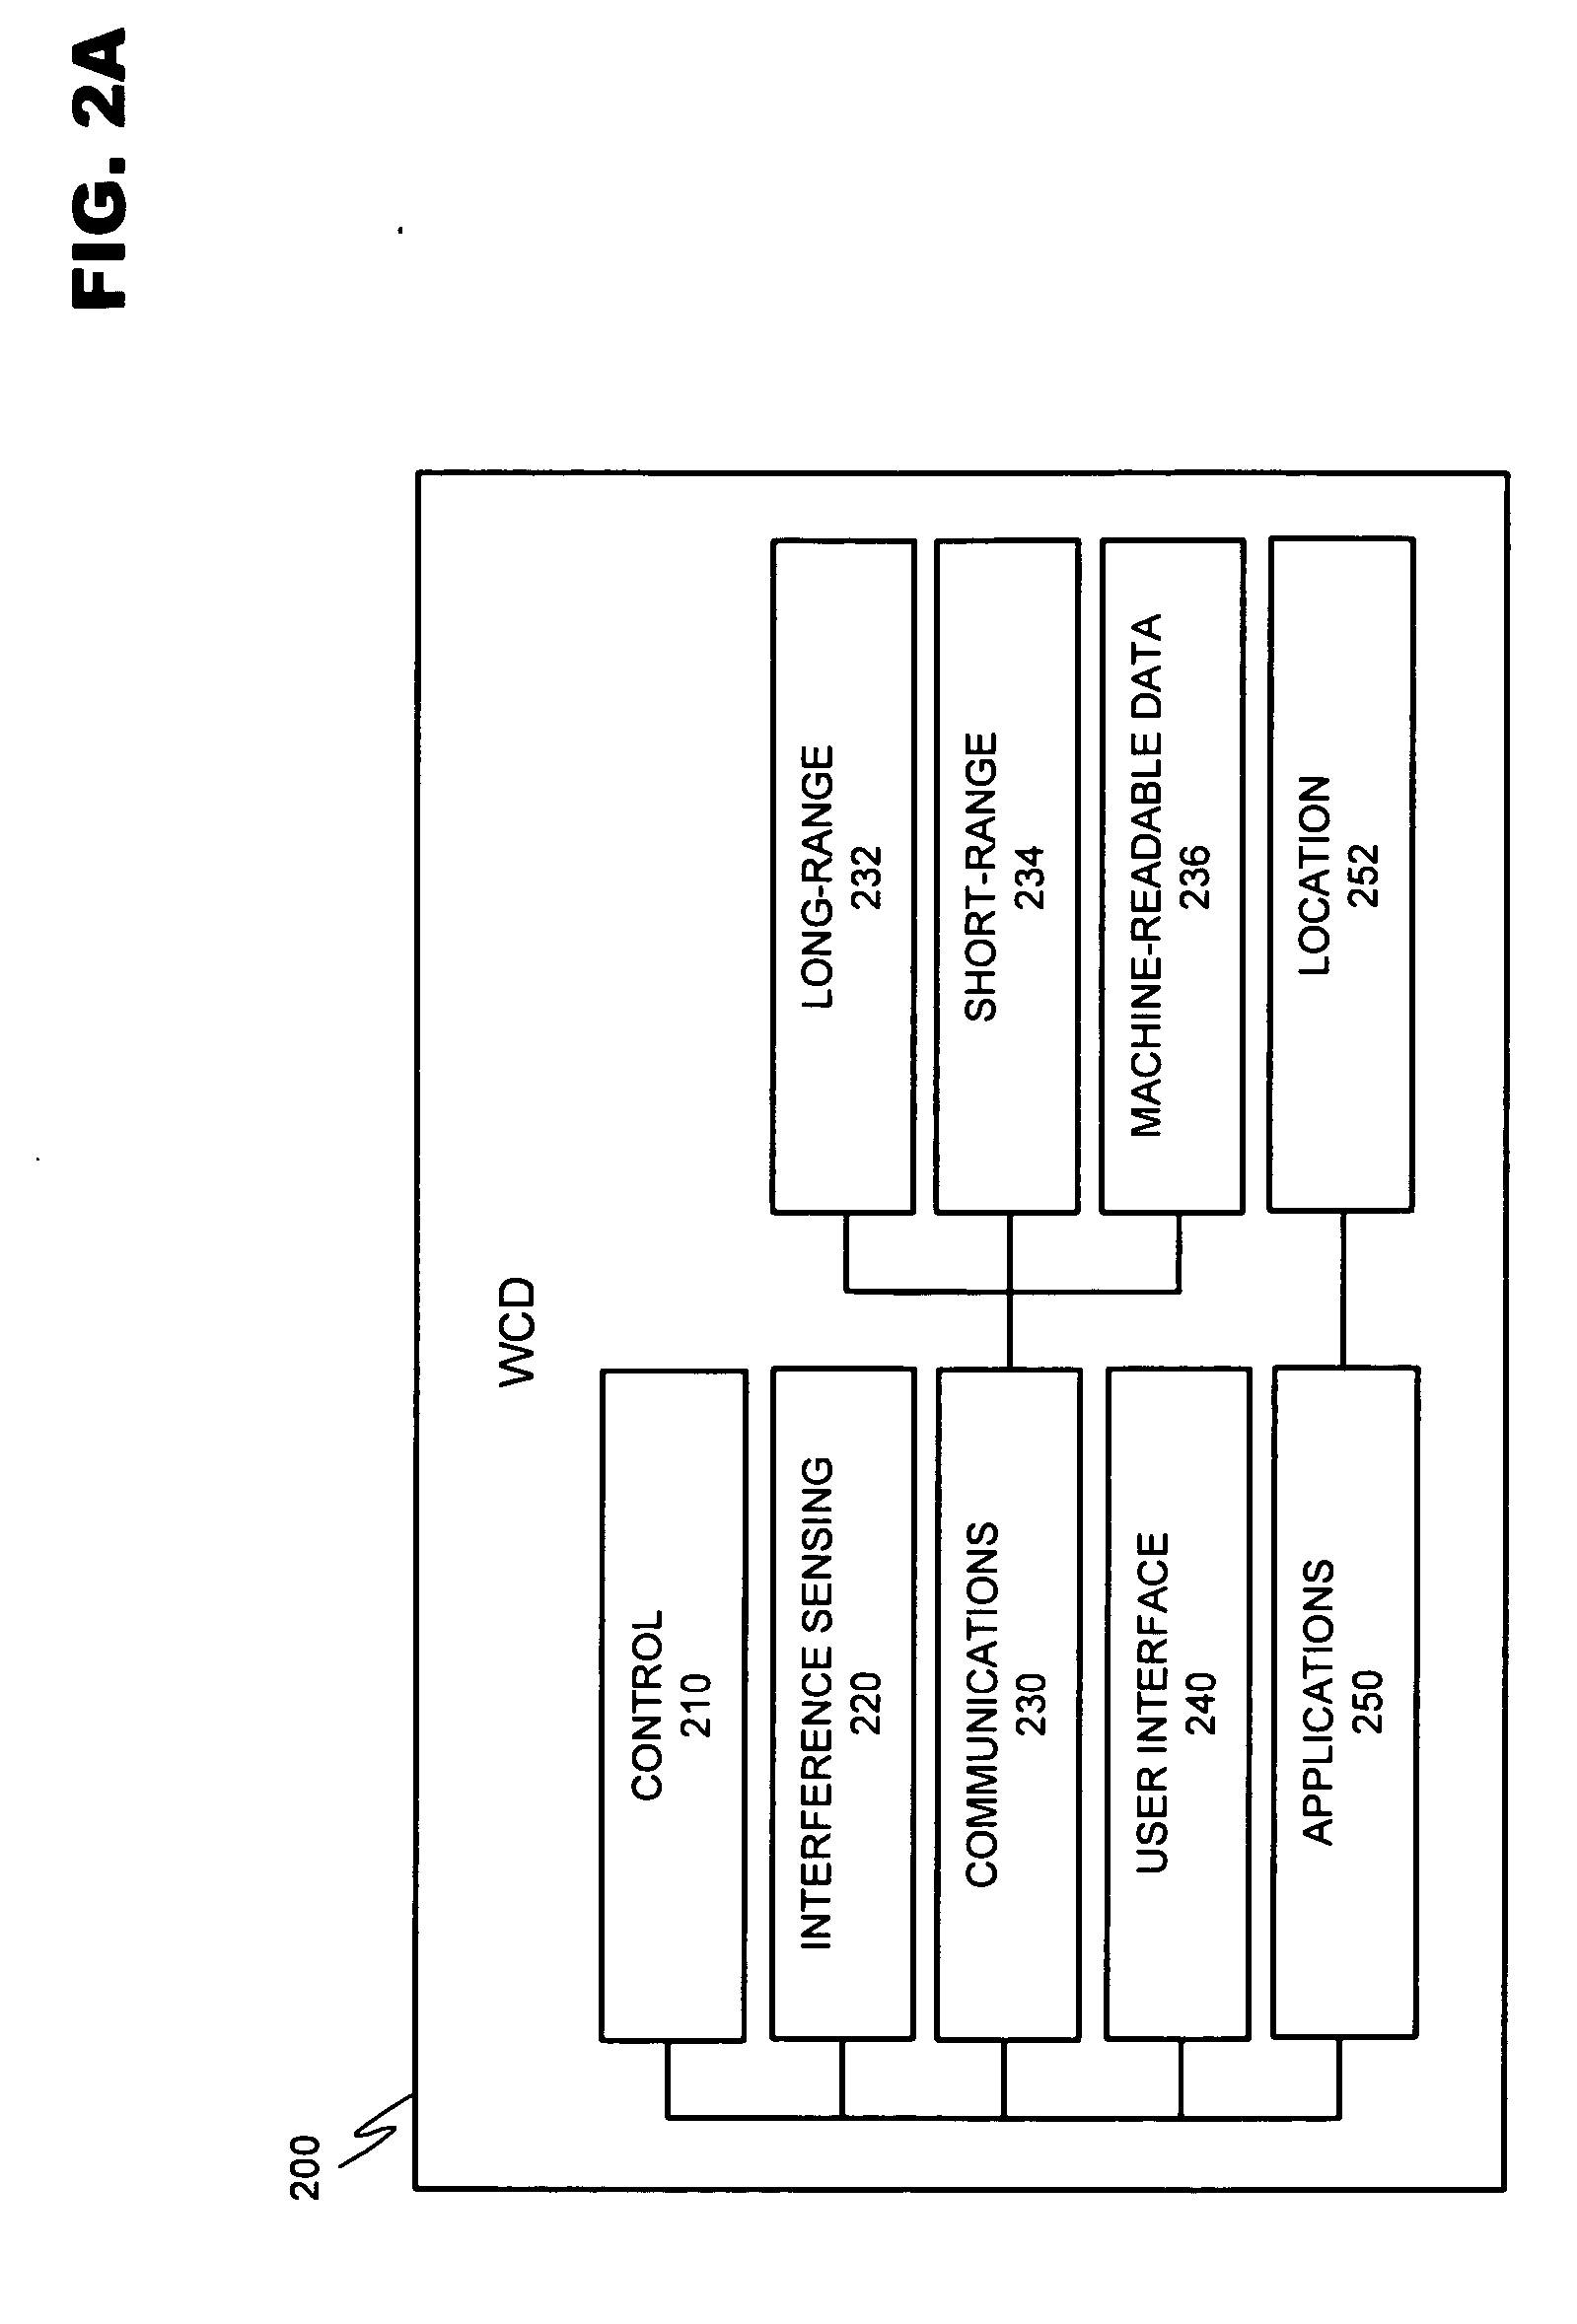 Method for signaling geographical constraints